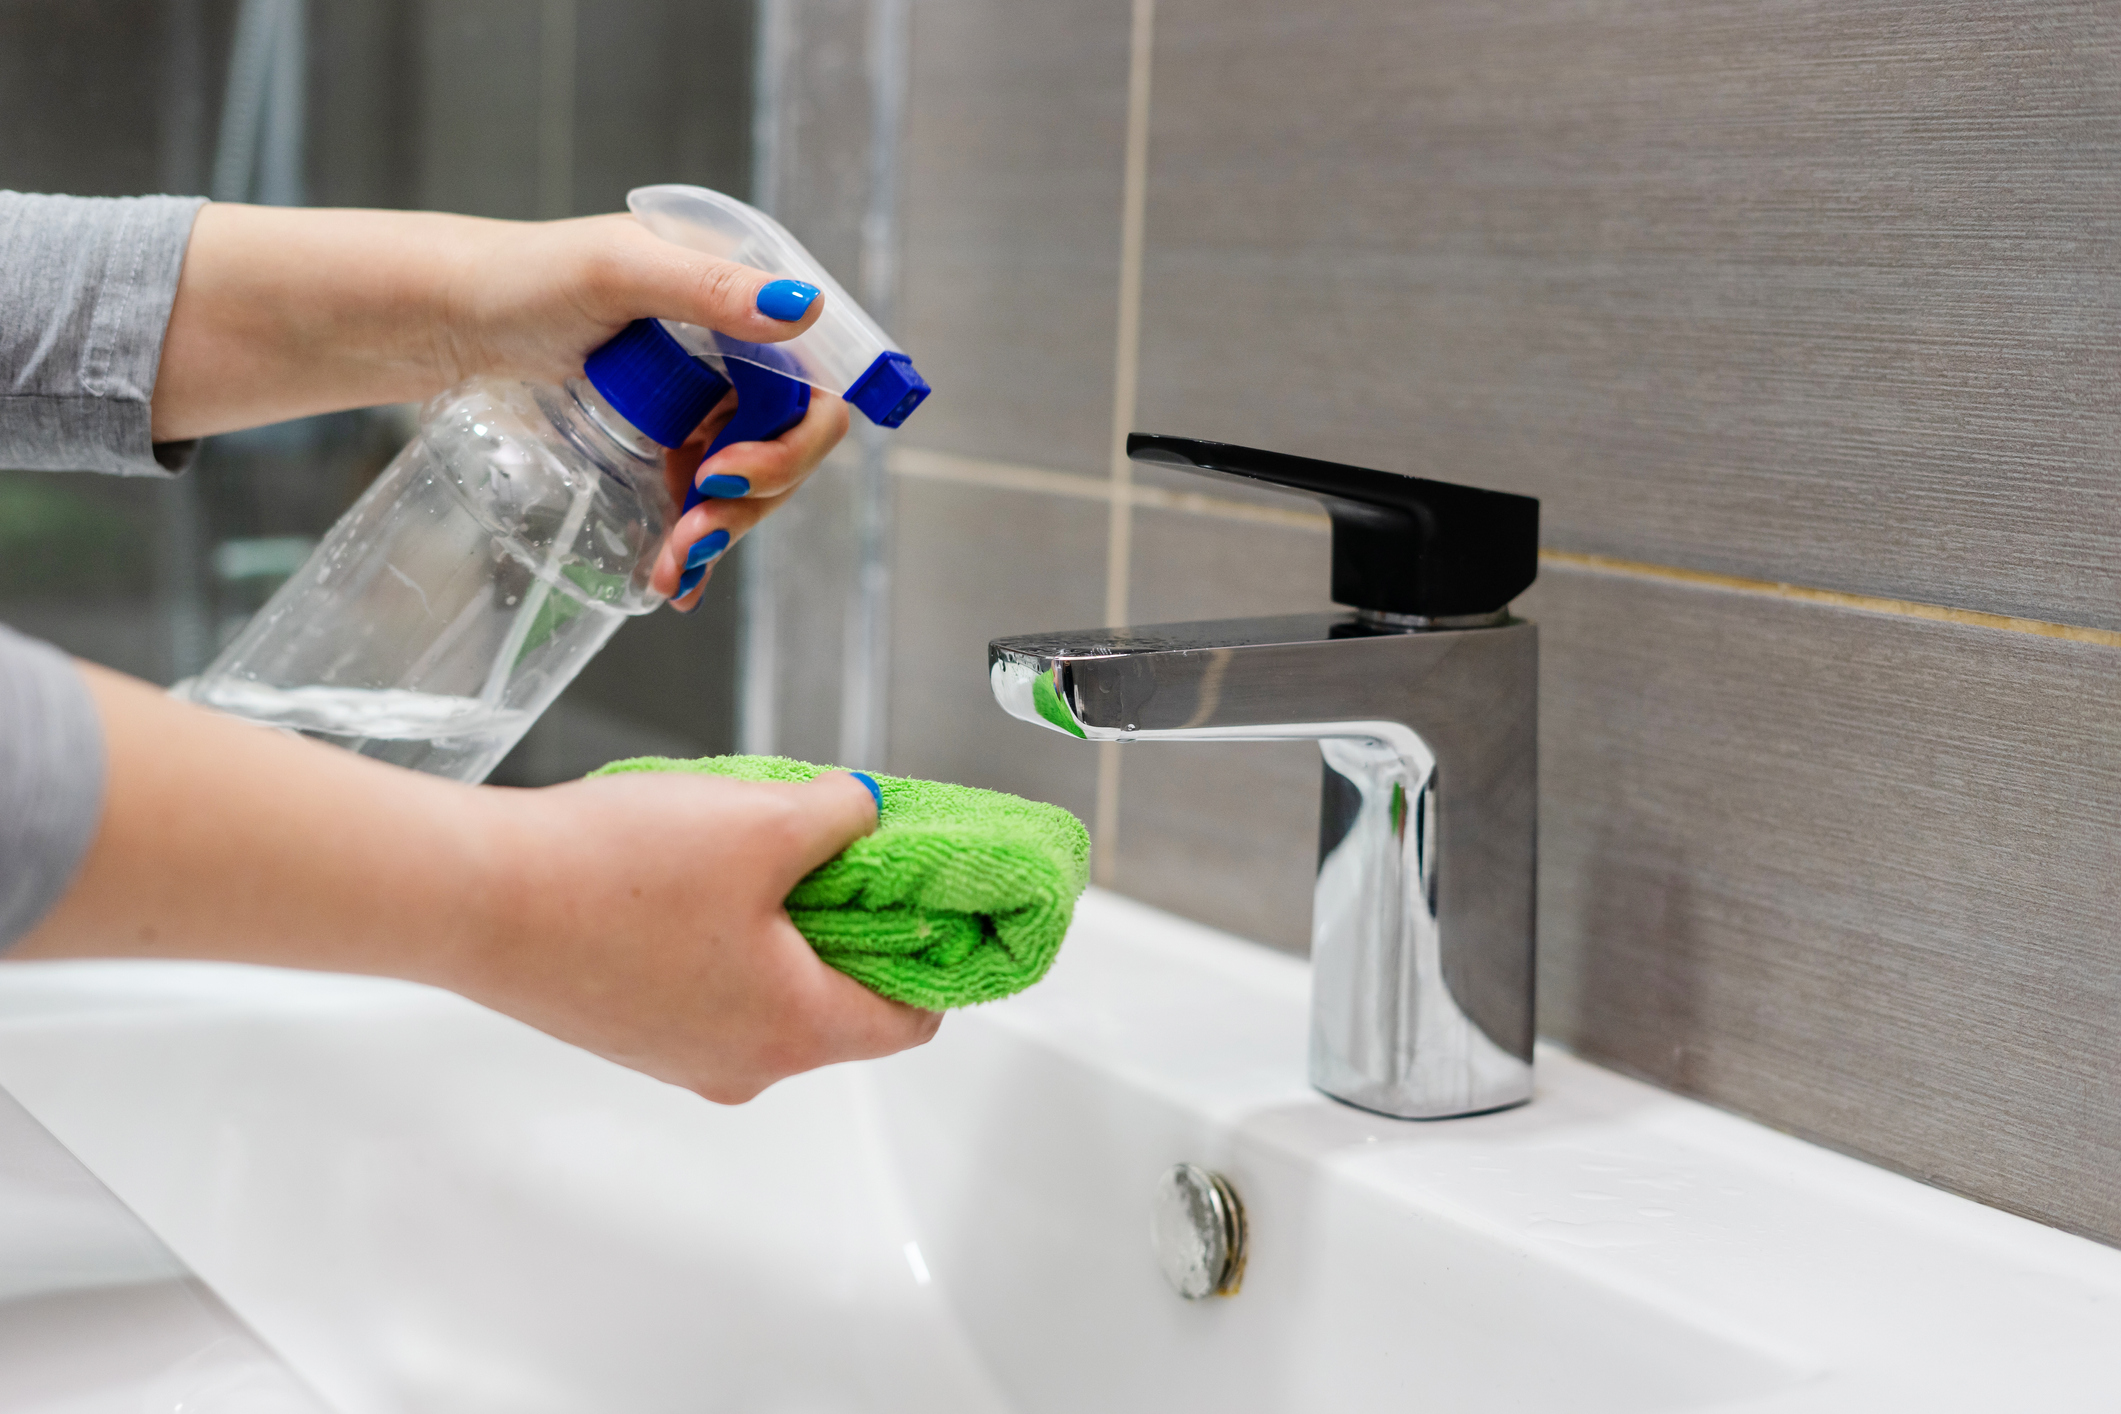 Close up image of a woman cleaning limescale off a tap using a spray bottle and damp cloth